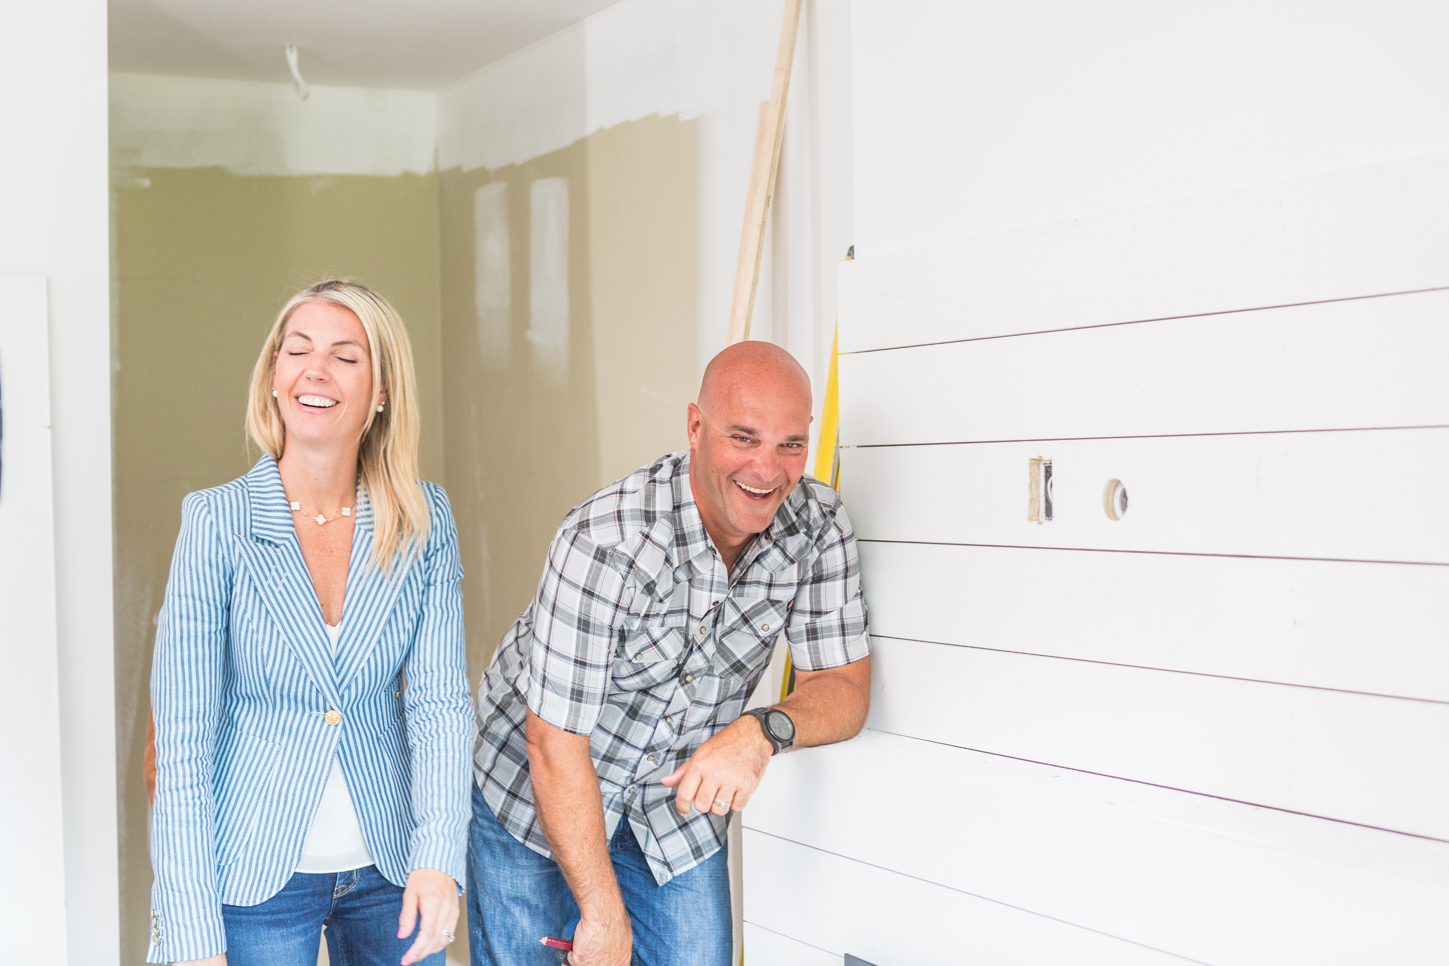 Bryan and Sarah Baeumler laughing in a room with neutral walls